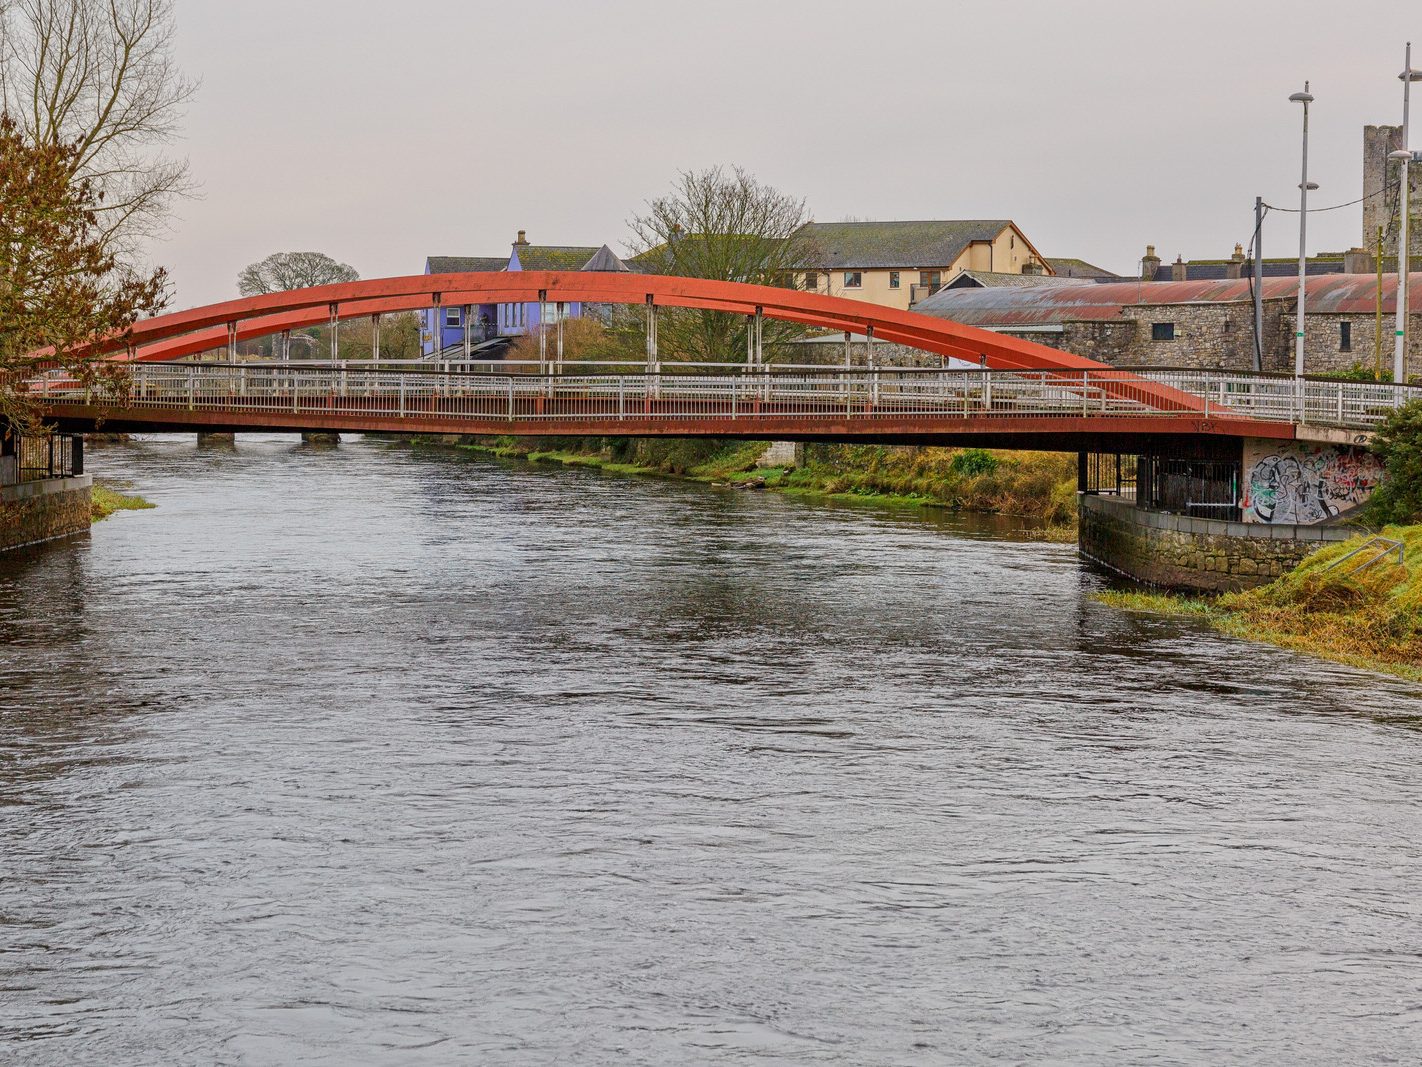 WATERGATE STREET AND WATERGATE BRIDGE [THE TOWN OF TRIM IN COUNTY MEATH]-226465-1